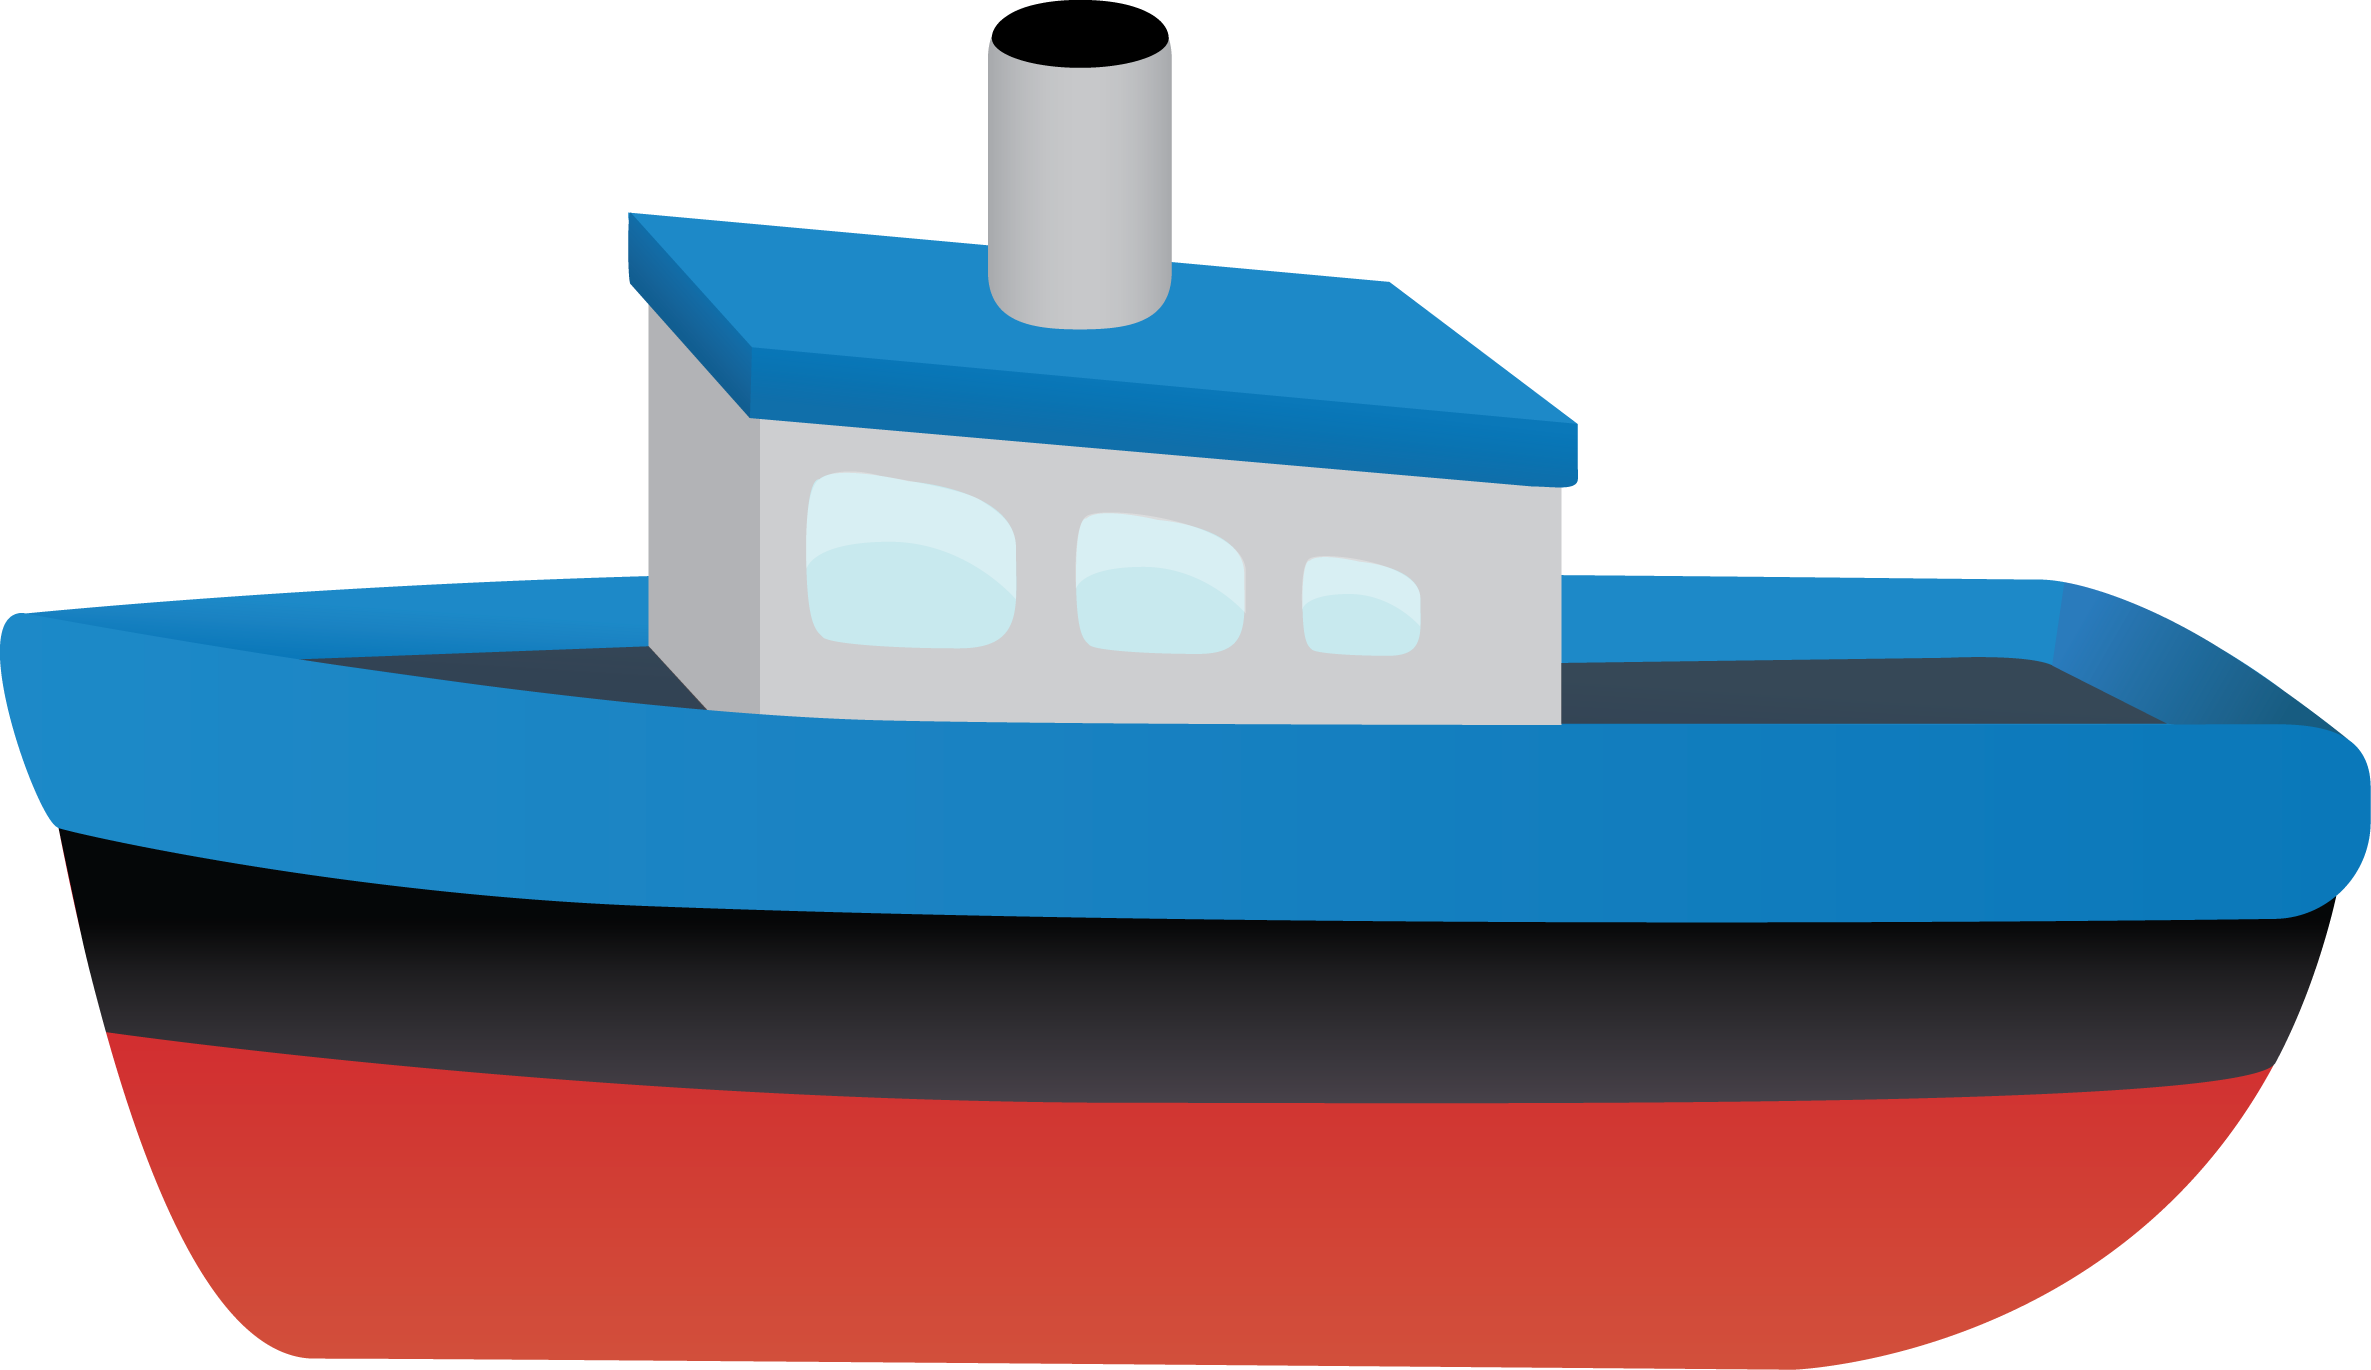 Boat Drawing PNG, Vector, PSD, and Clipart With Transparent